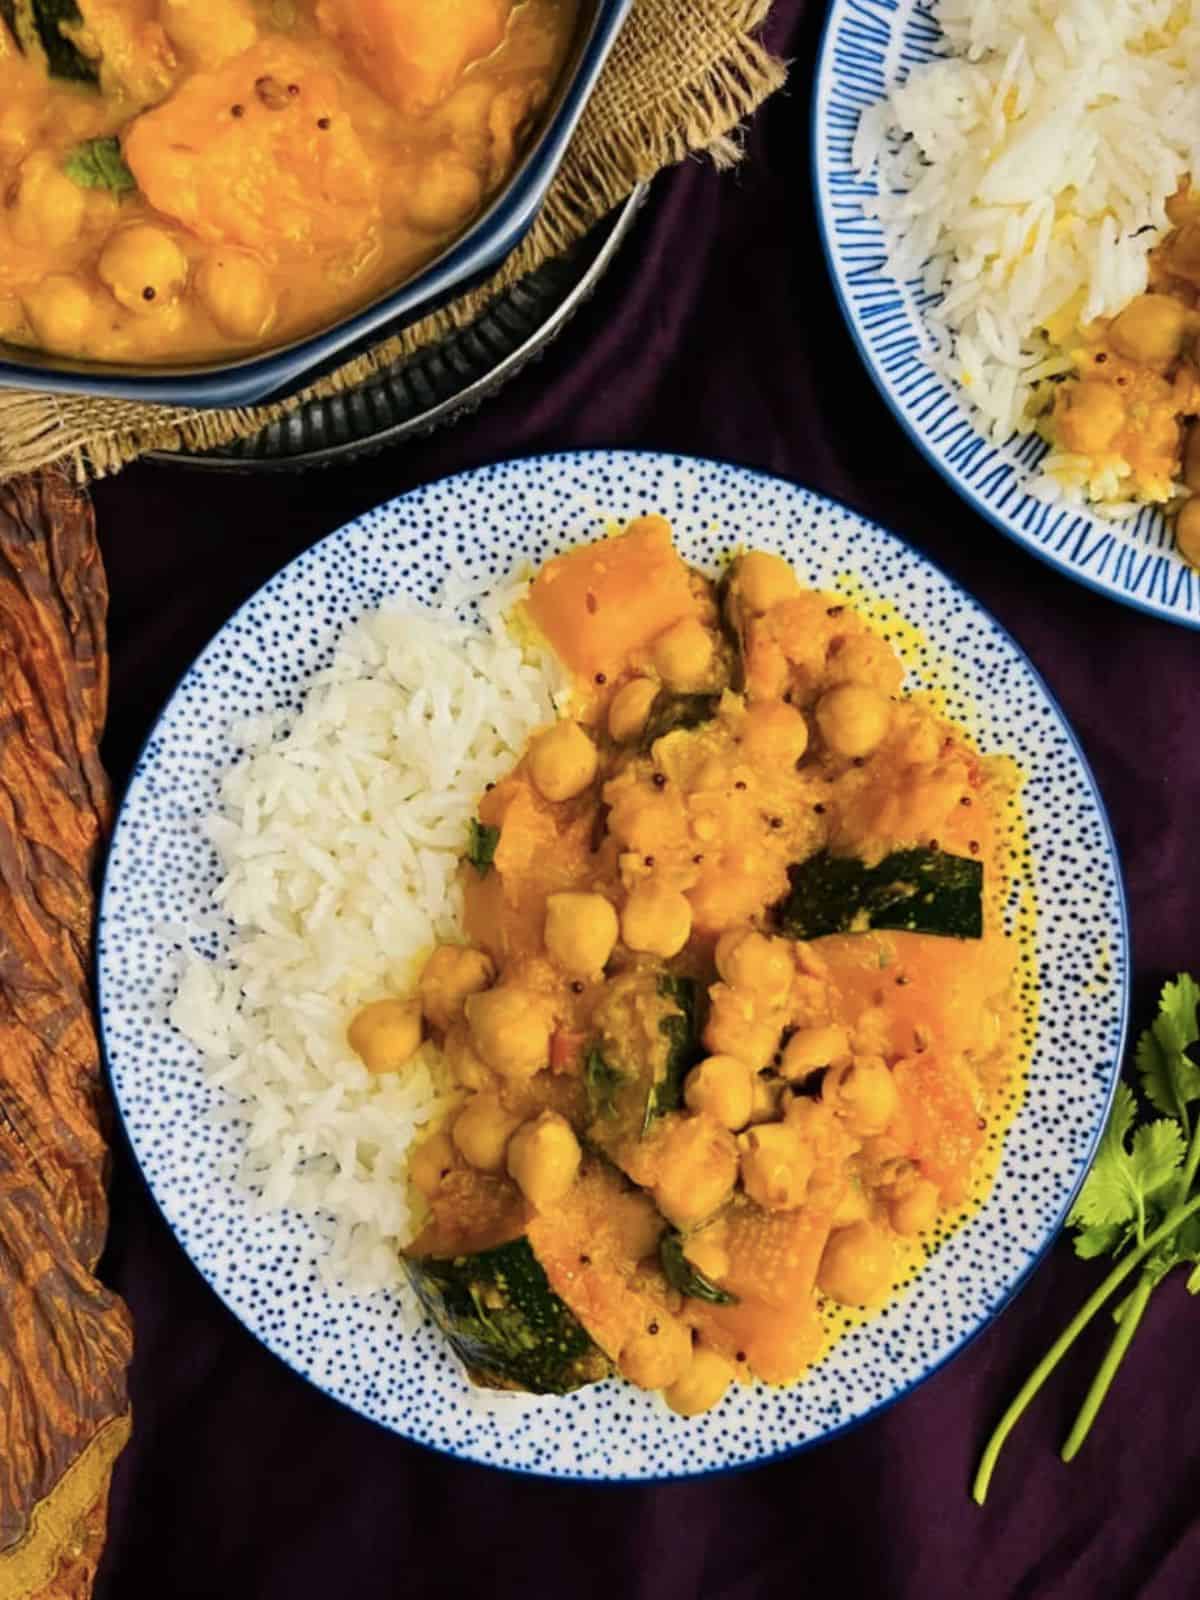 Pumpkin and chickpea curry.
